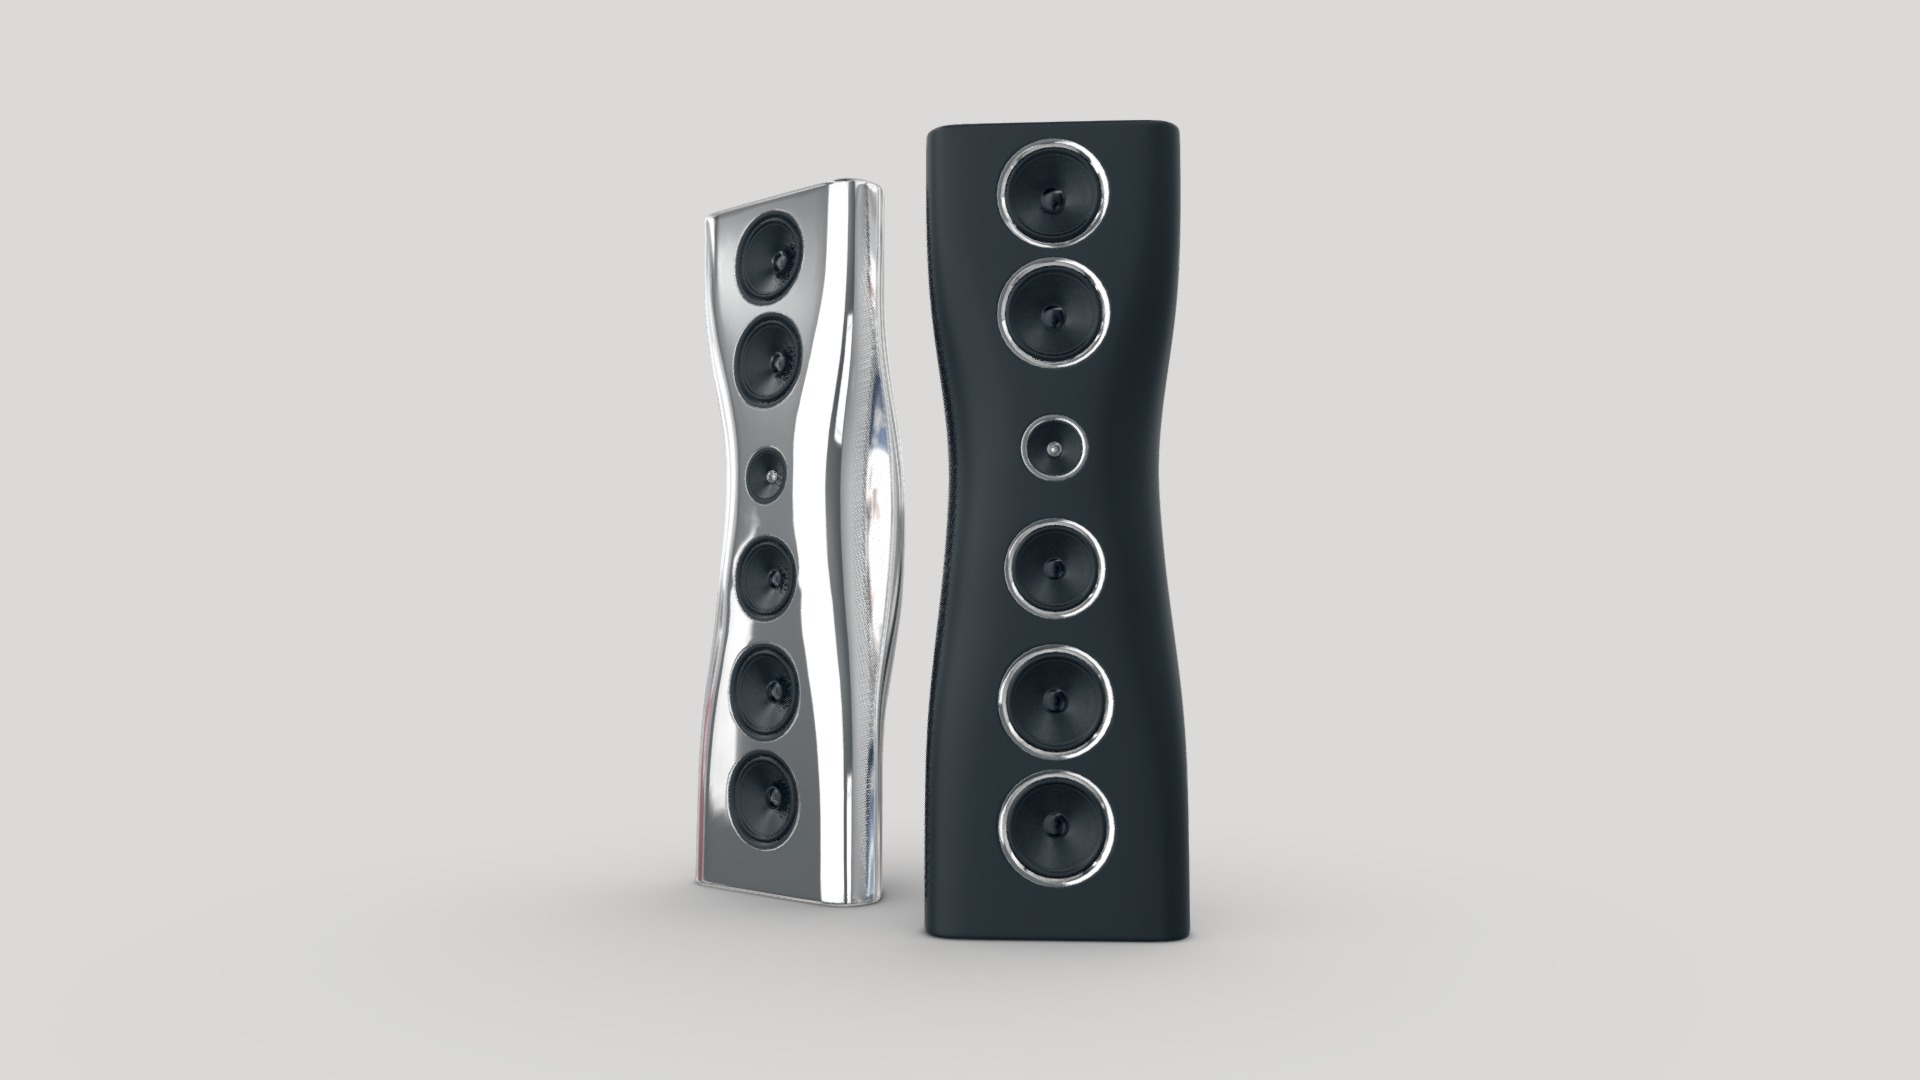 A triumph of form marrying function, MUON is perhaps the most extraordinary loudspeaker ever conceived.

MUON is the result of KEF engineering prowess combining with world-class industrial design by Ross Lovegrove. The Muon is limited to an edition of 100 pair 3d model